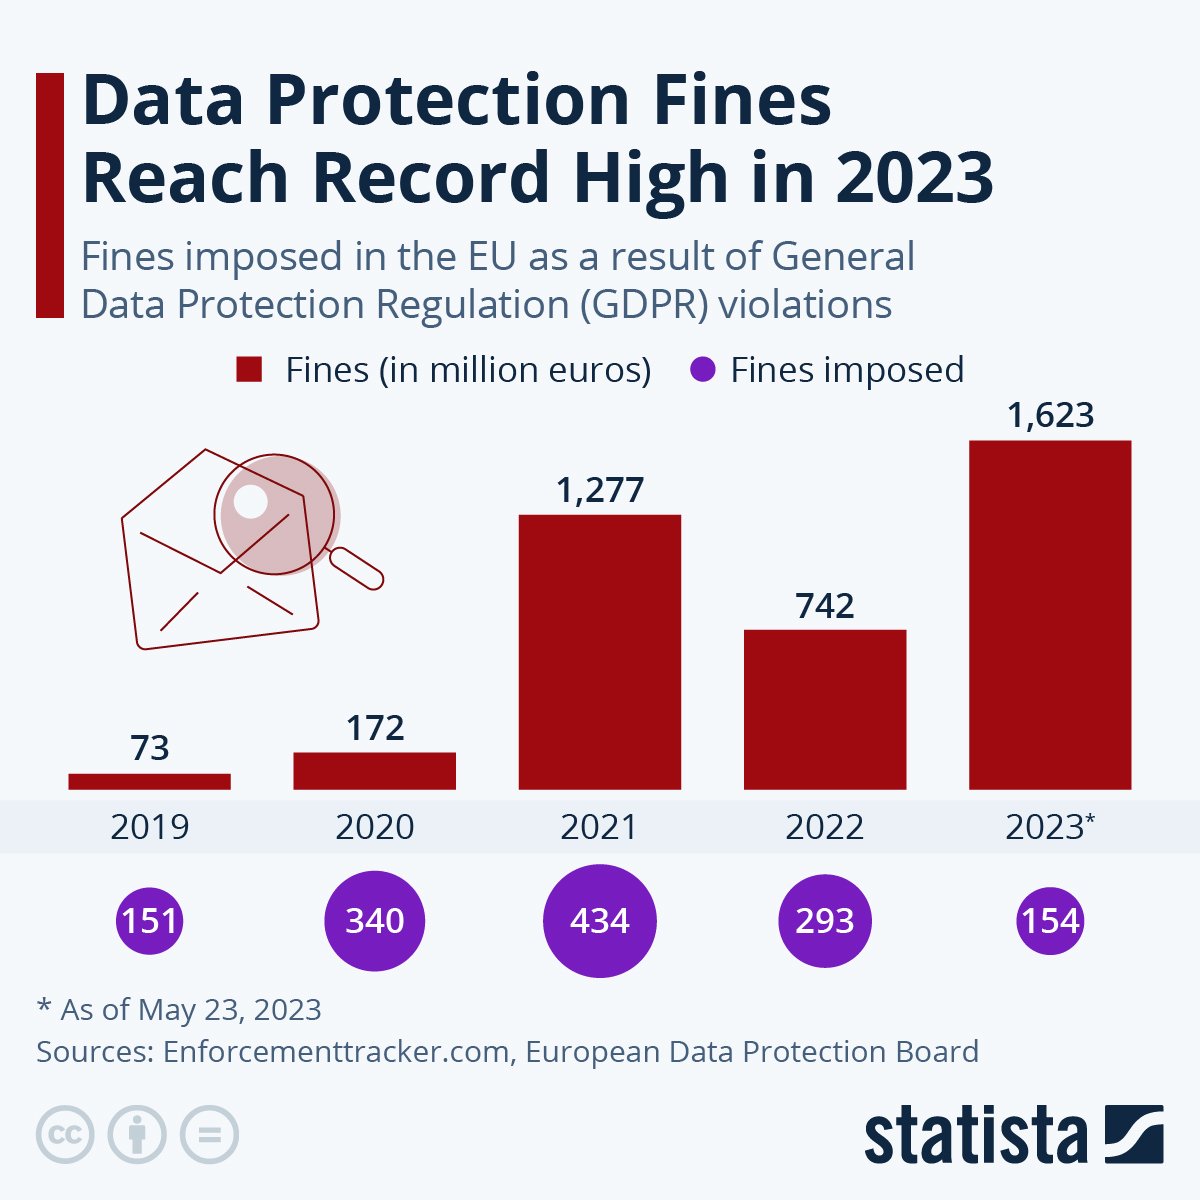 Statista data protection fines